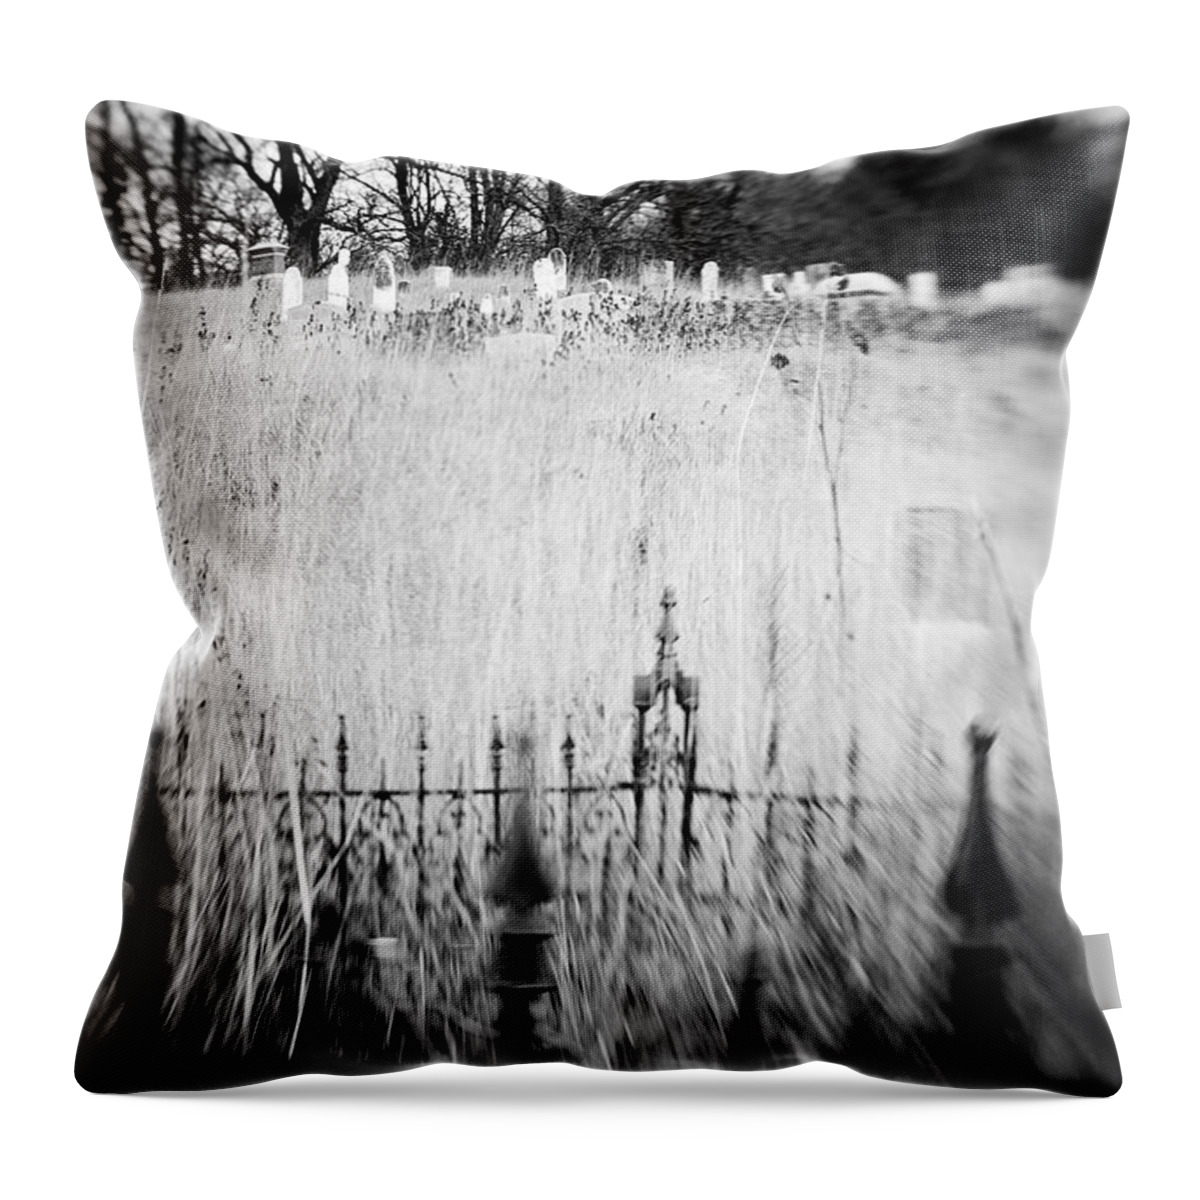 B&w Throw Pillow featuring the photograph Graveyard 6788 by Timothy Bischoff